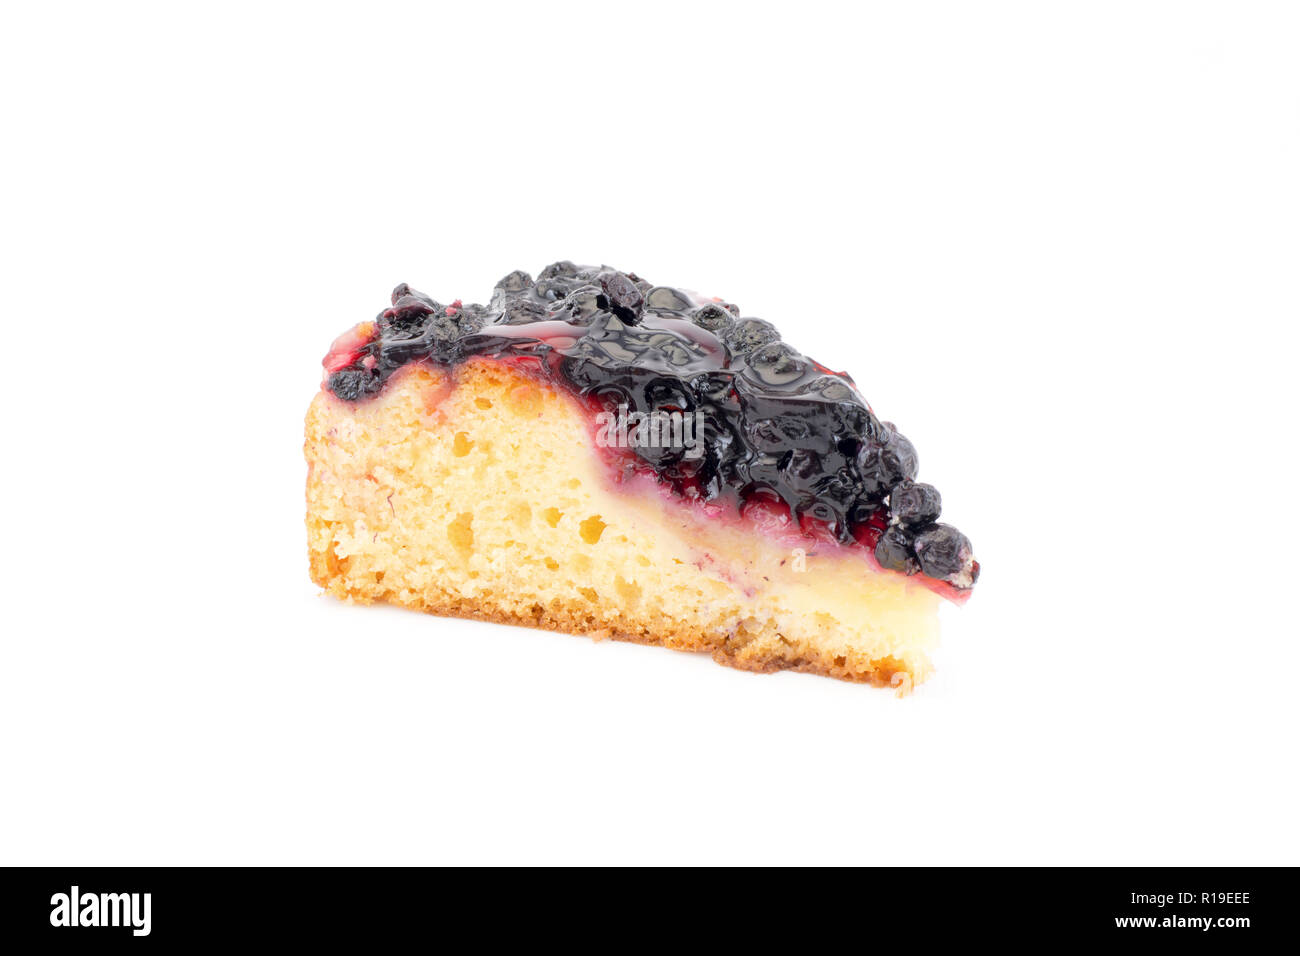 A piece of cake with fresh blueberries on a white background Stock Photo